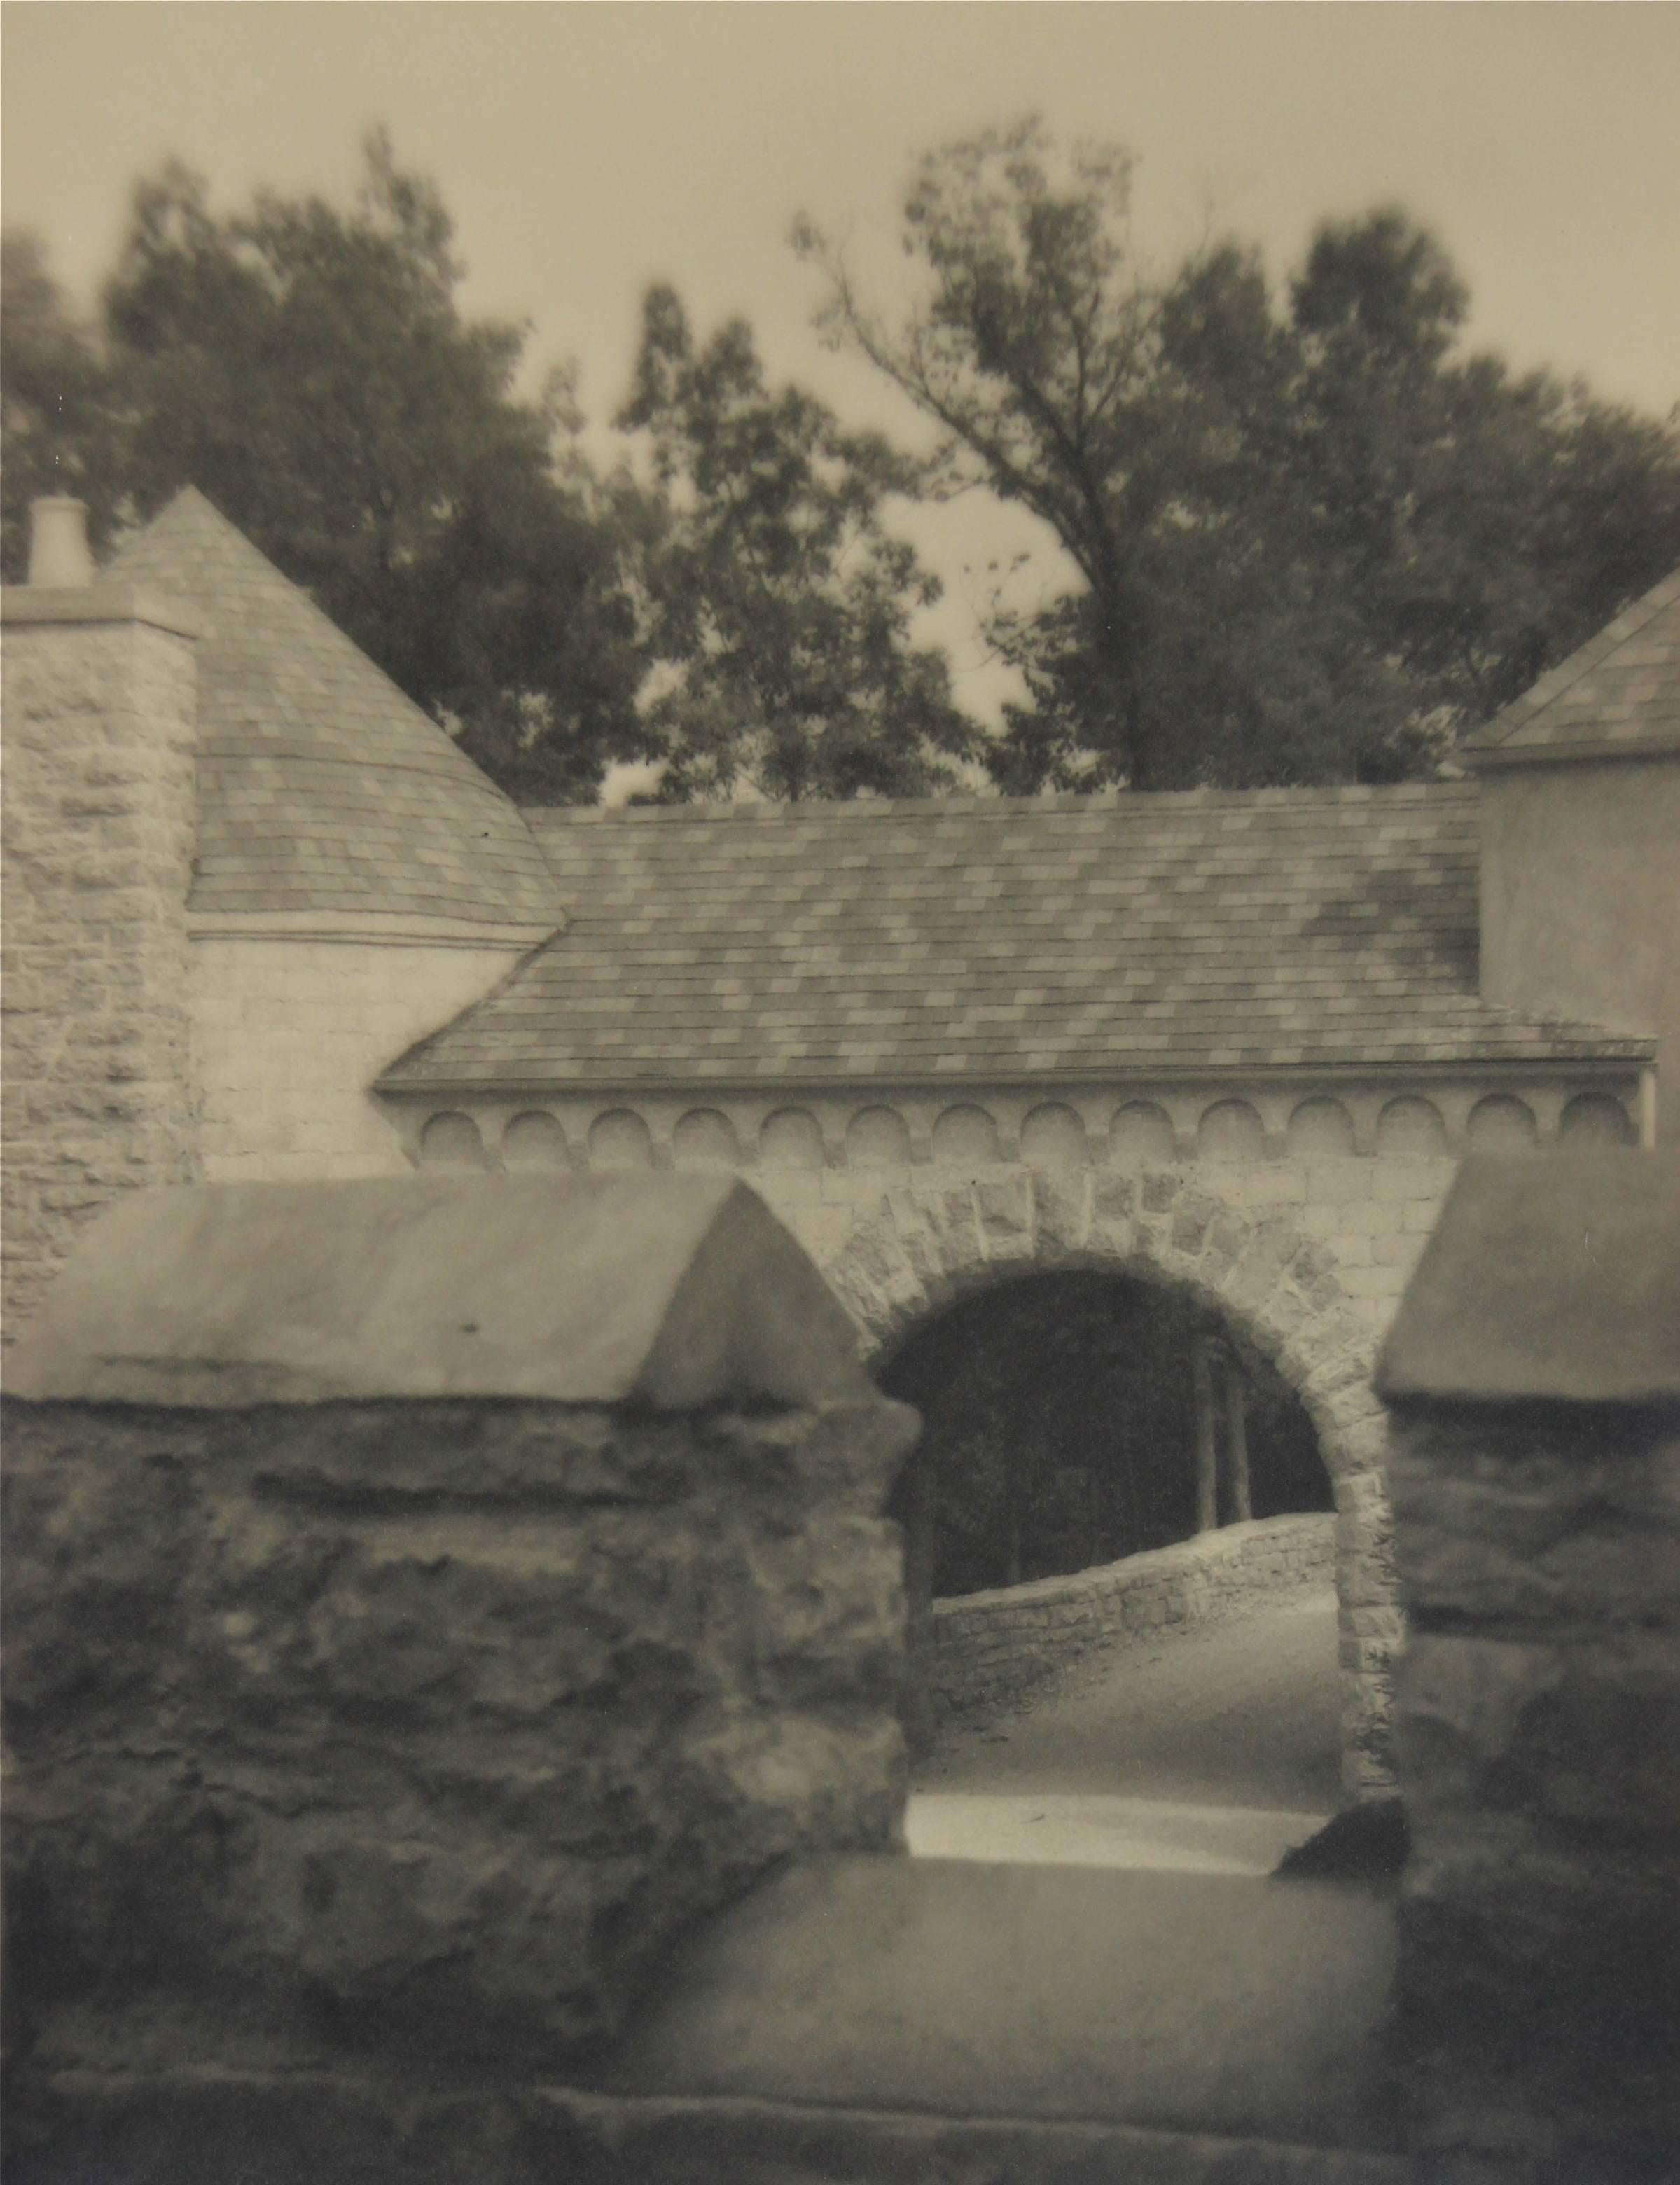 Dr. F.W. Buraky Black and White Photograph - Brick Building and Roof, Silver Gelatin Photograph, Circa 1920s